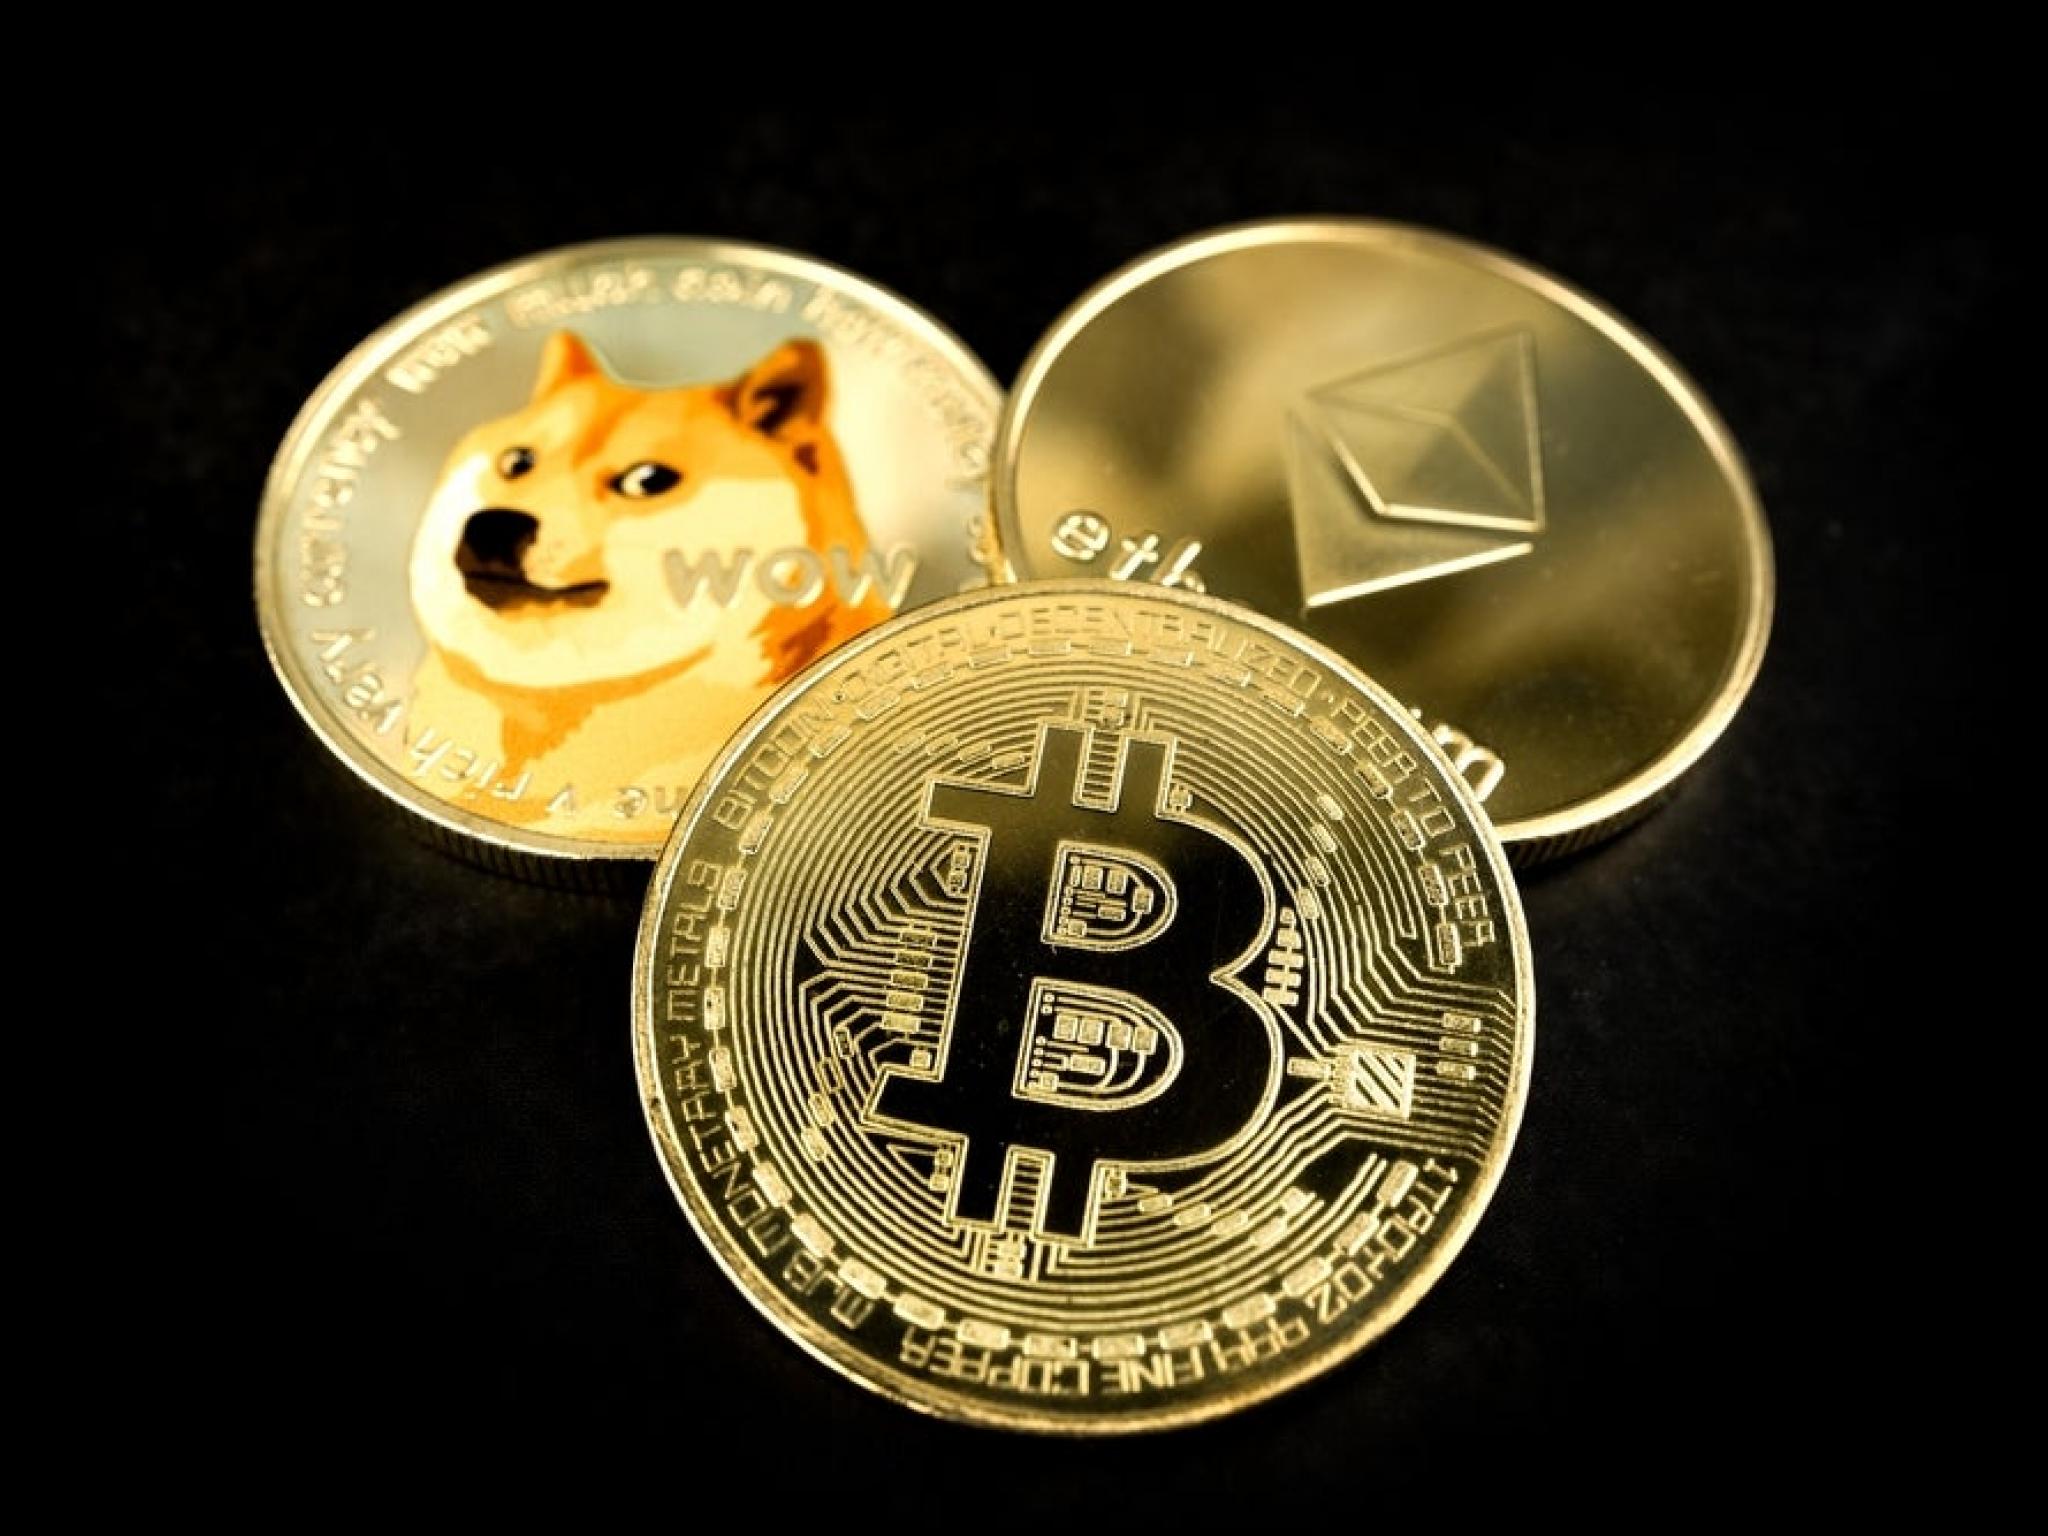  bitcoin-ethereum-hold-steady-dogecoin-spikes-as-biden-bows-out-of-presidential-race-king-crypto-might-have-a-chance-to-reclaim-715k-forecasts-analyst 